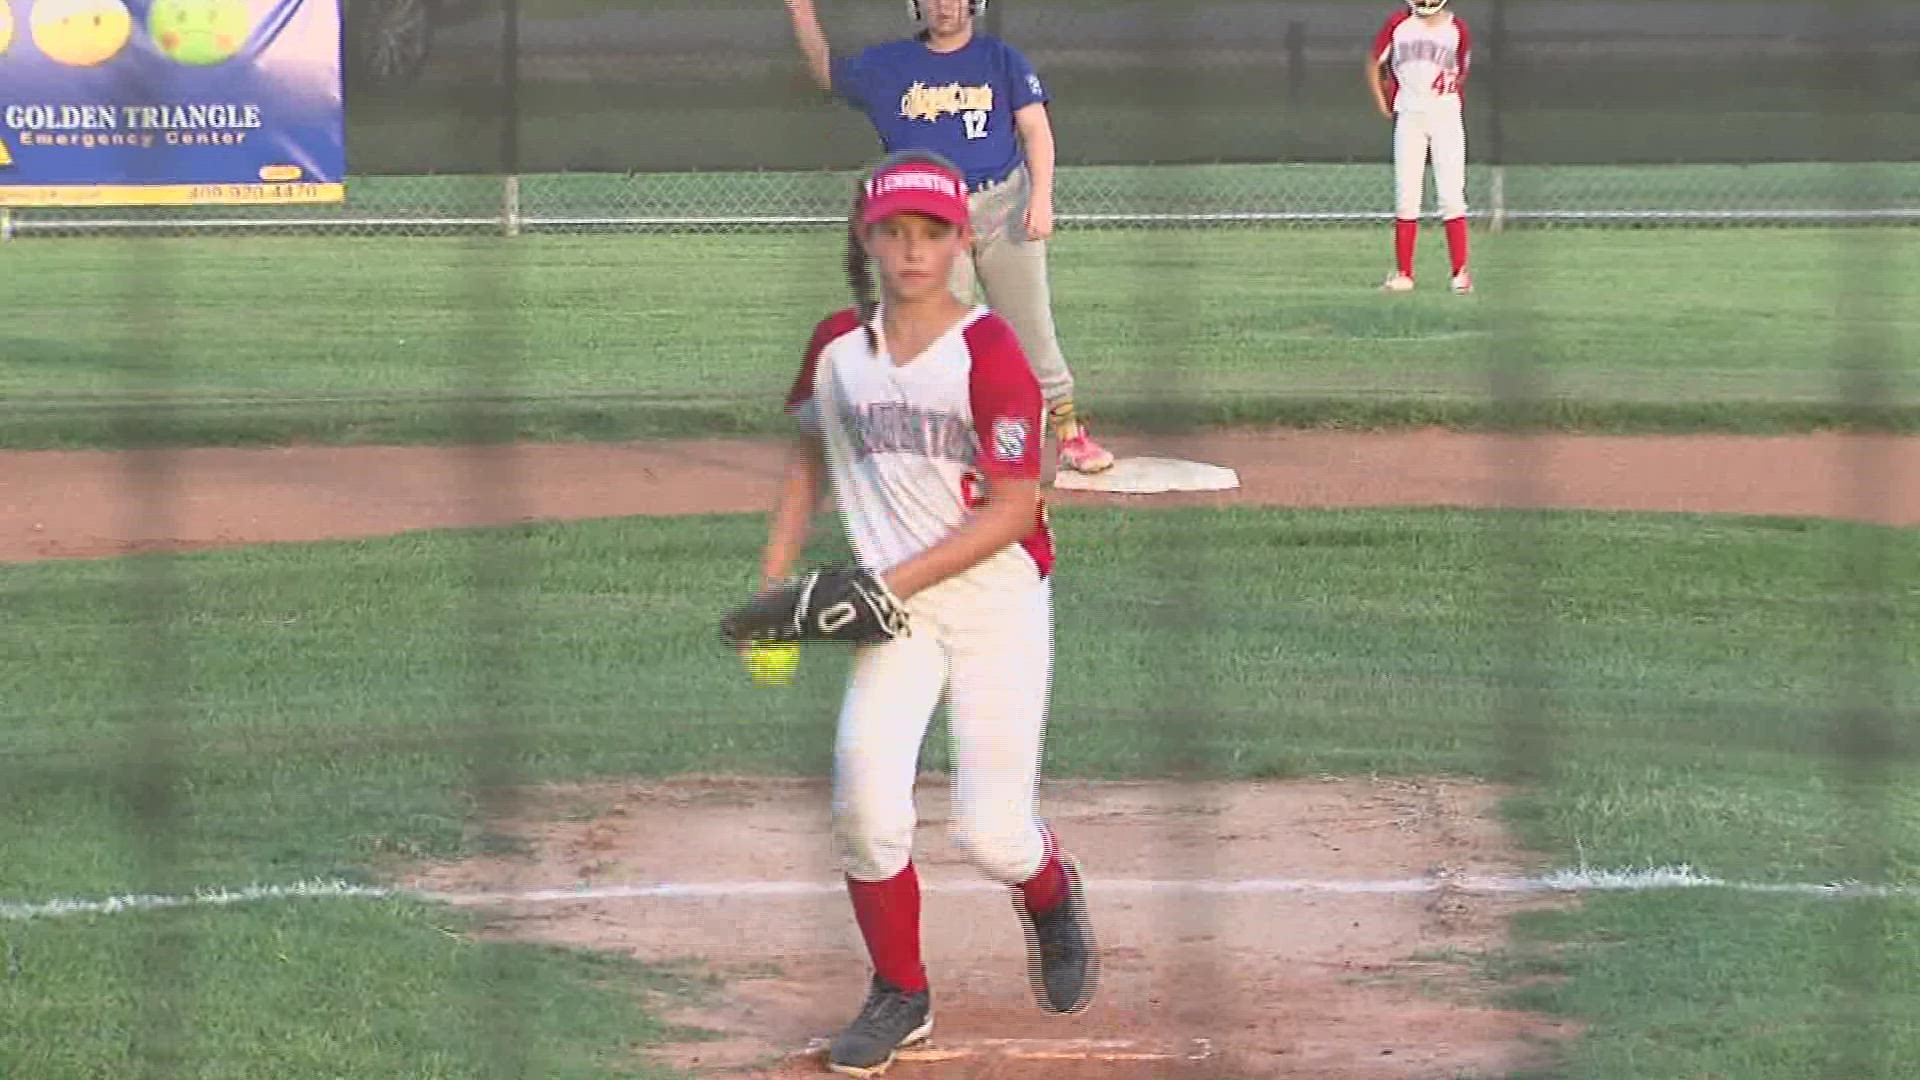 Lumberton blows past Channelview in Section 2 Tournament Semifinals